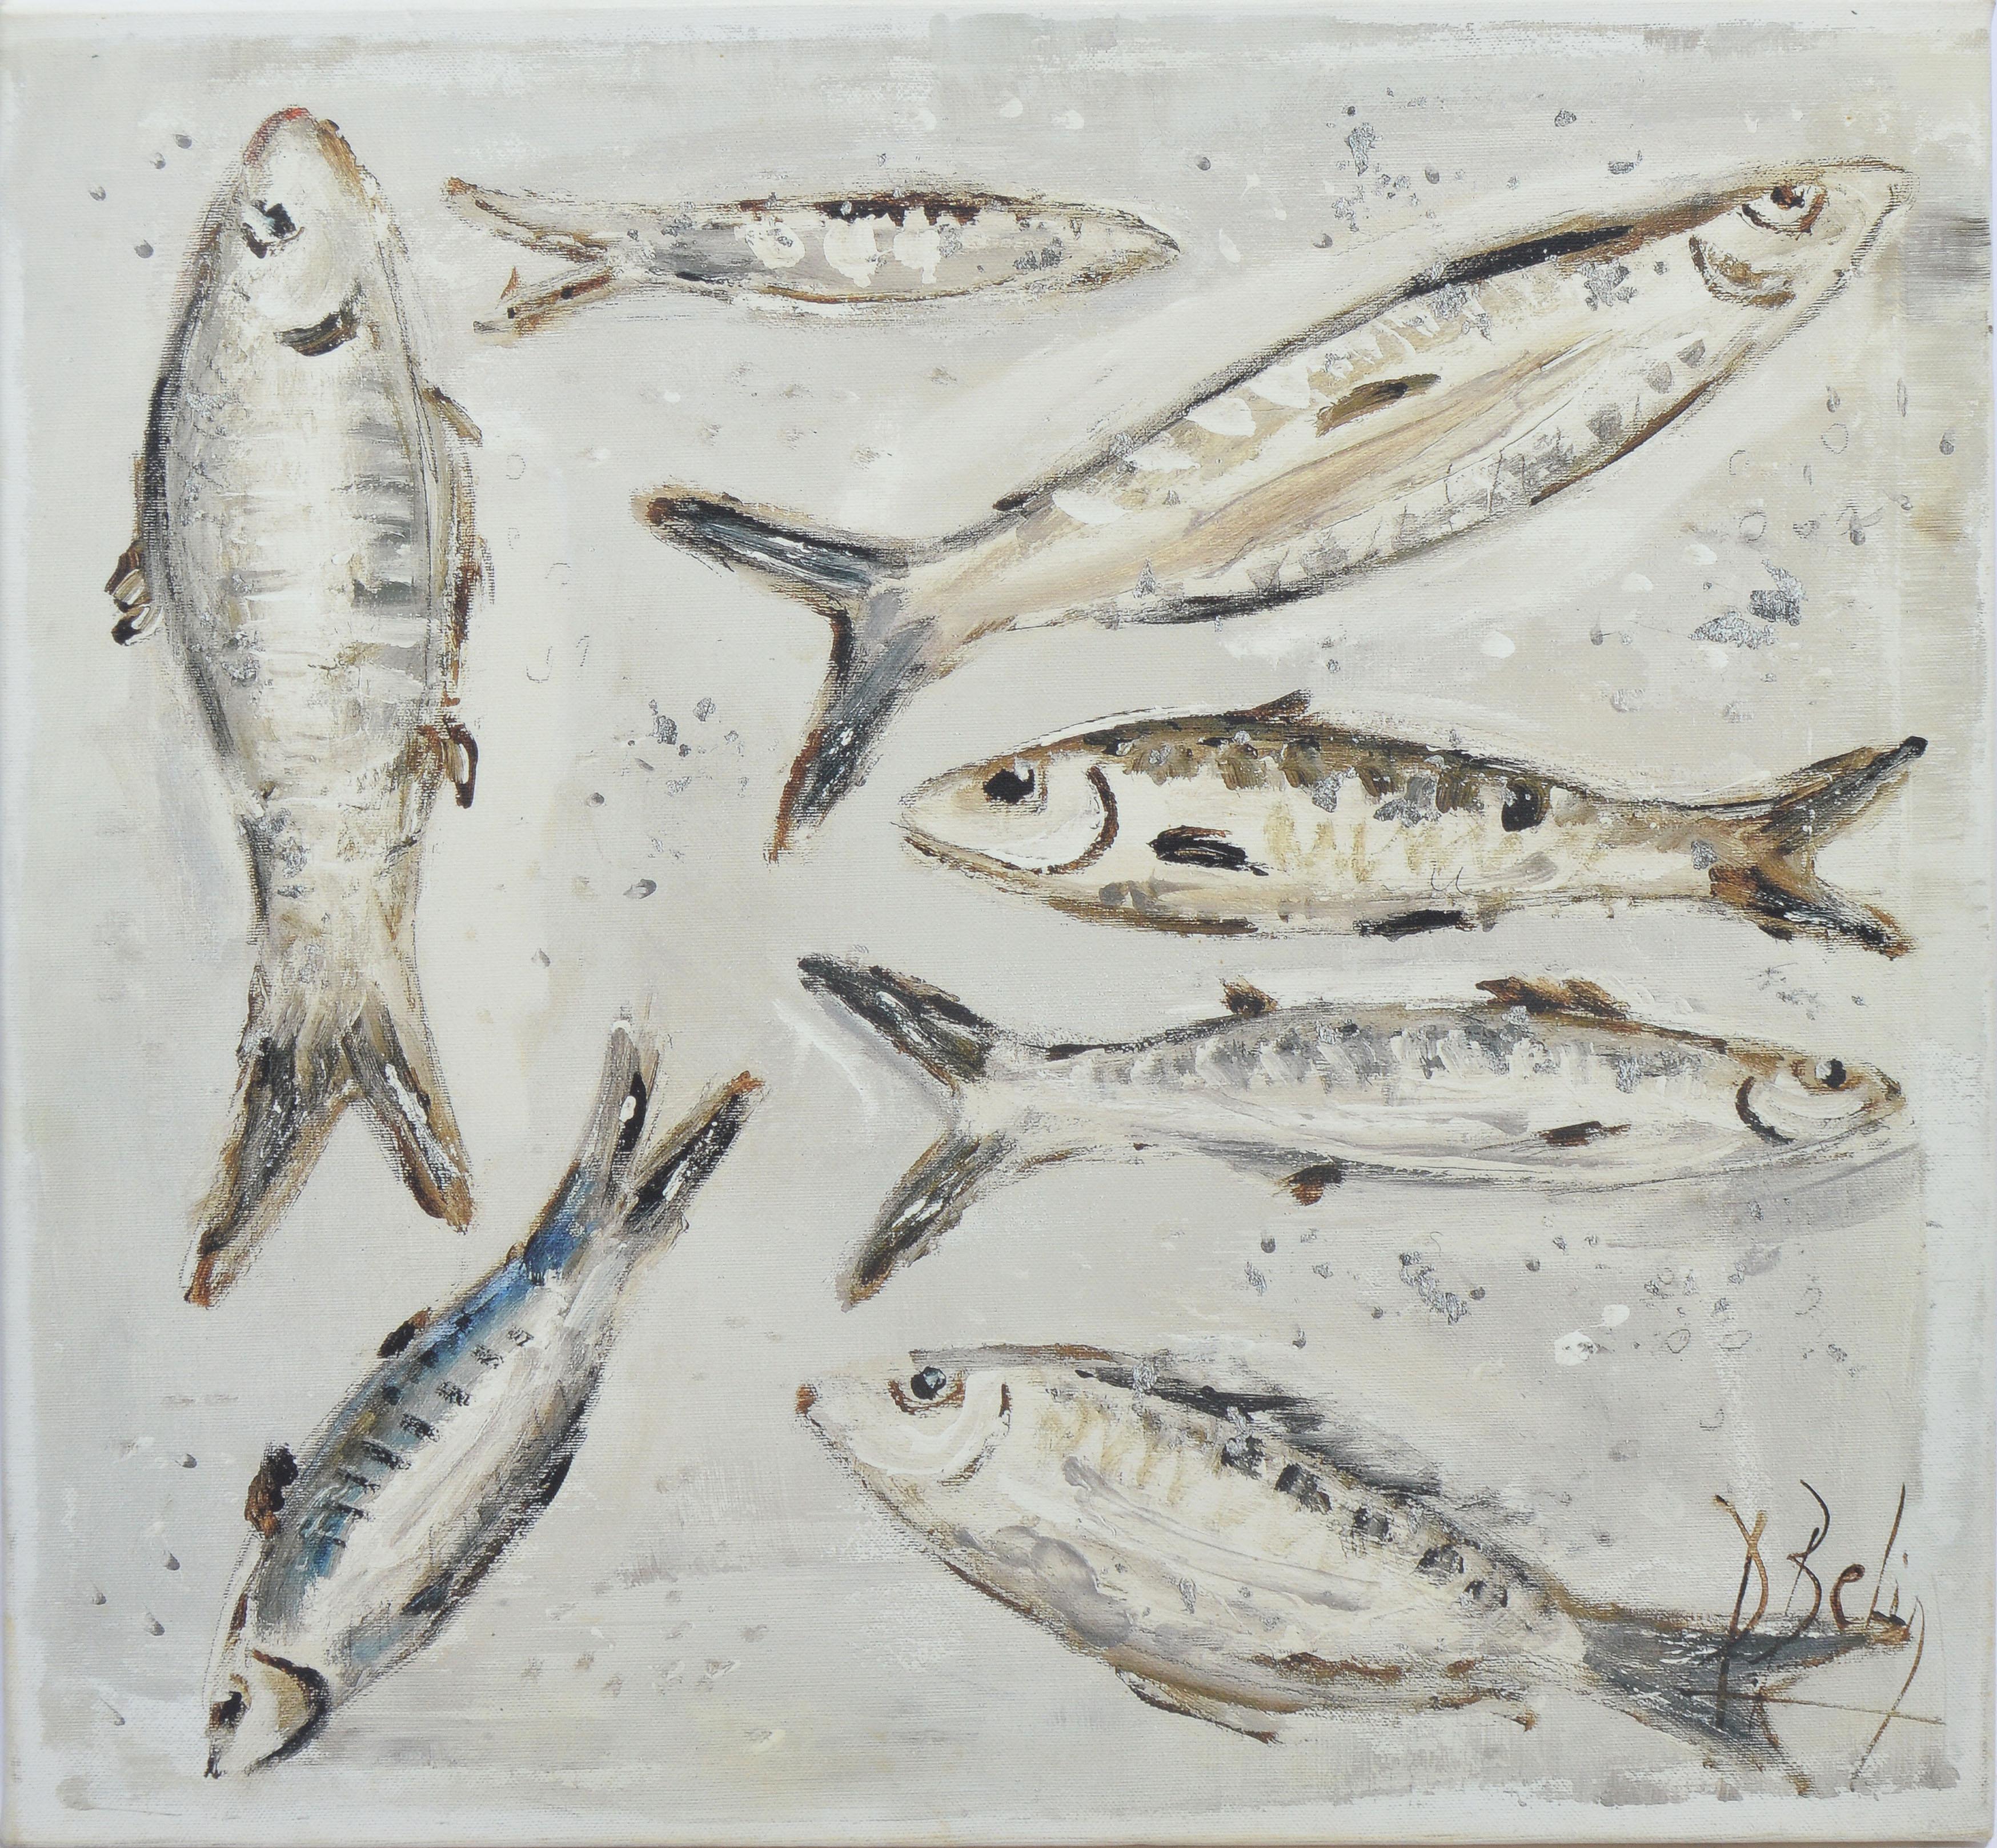 Vintage American School Modernist Still Life of Anchovy Fish in Black and White - Painting by Unknown